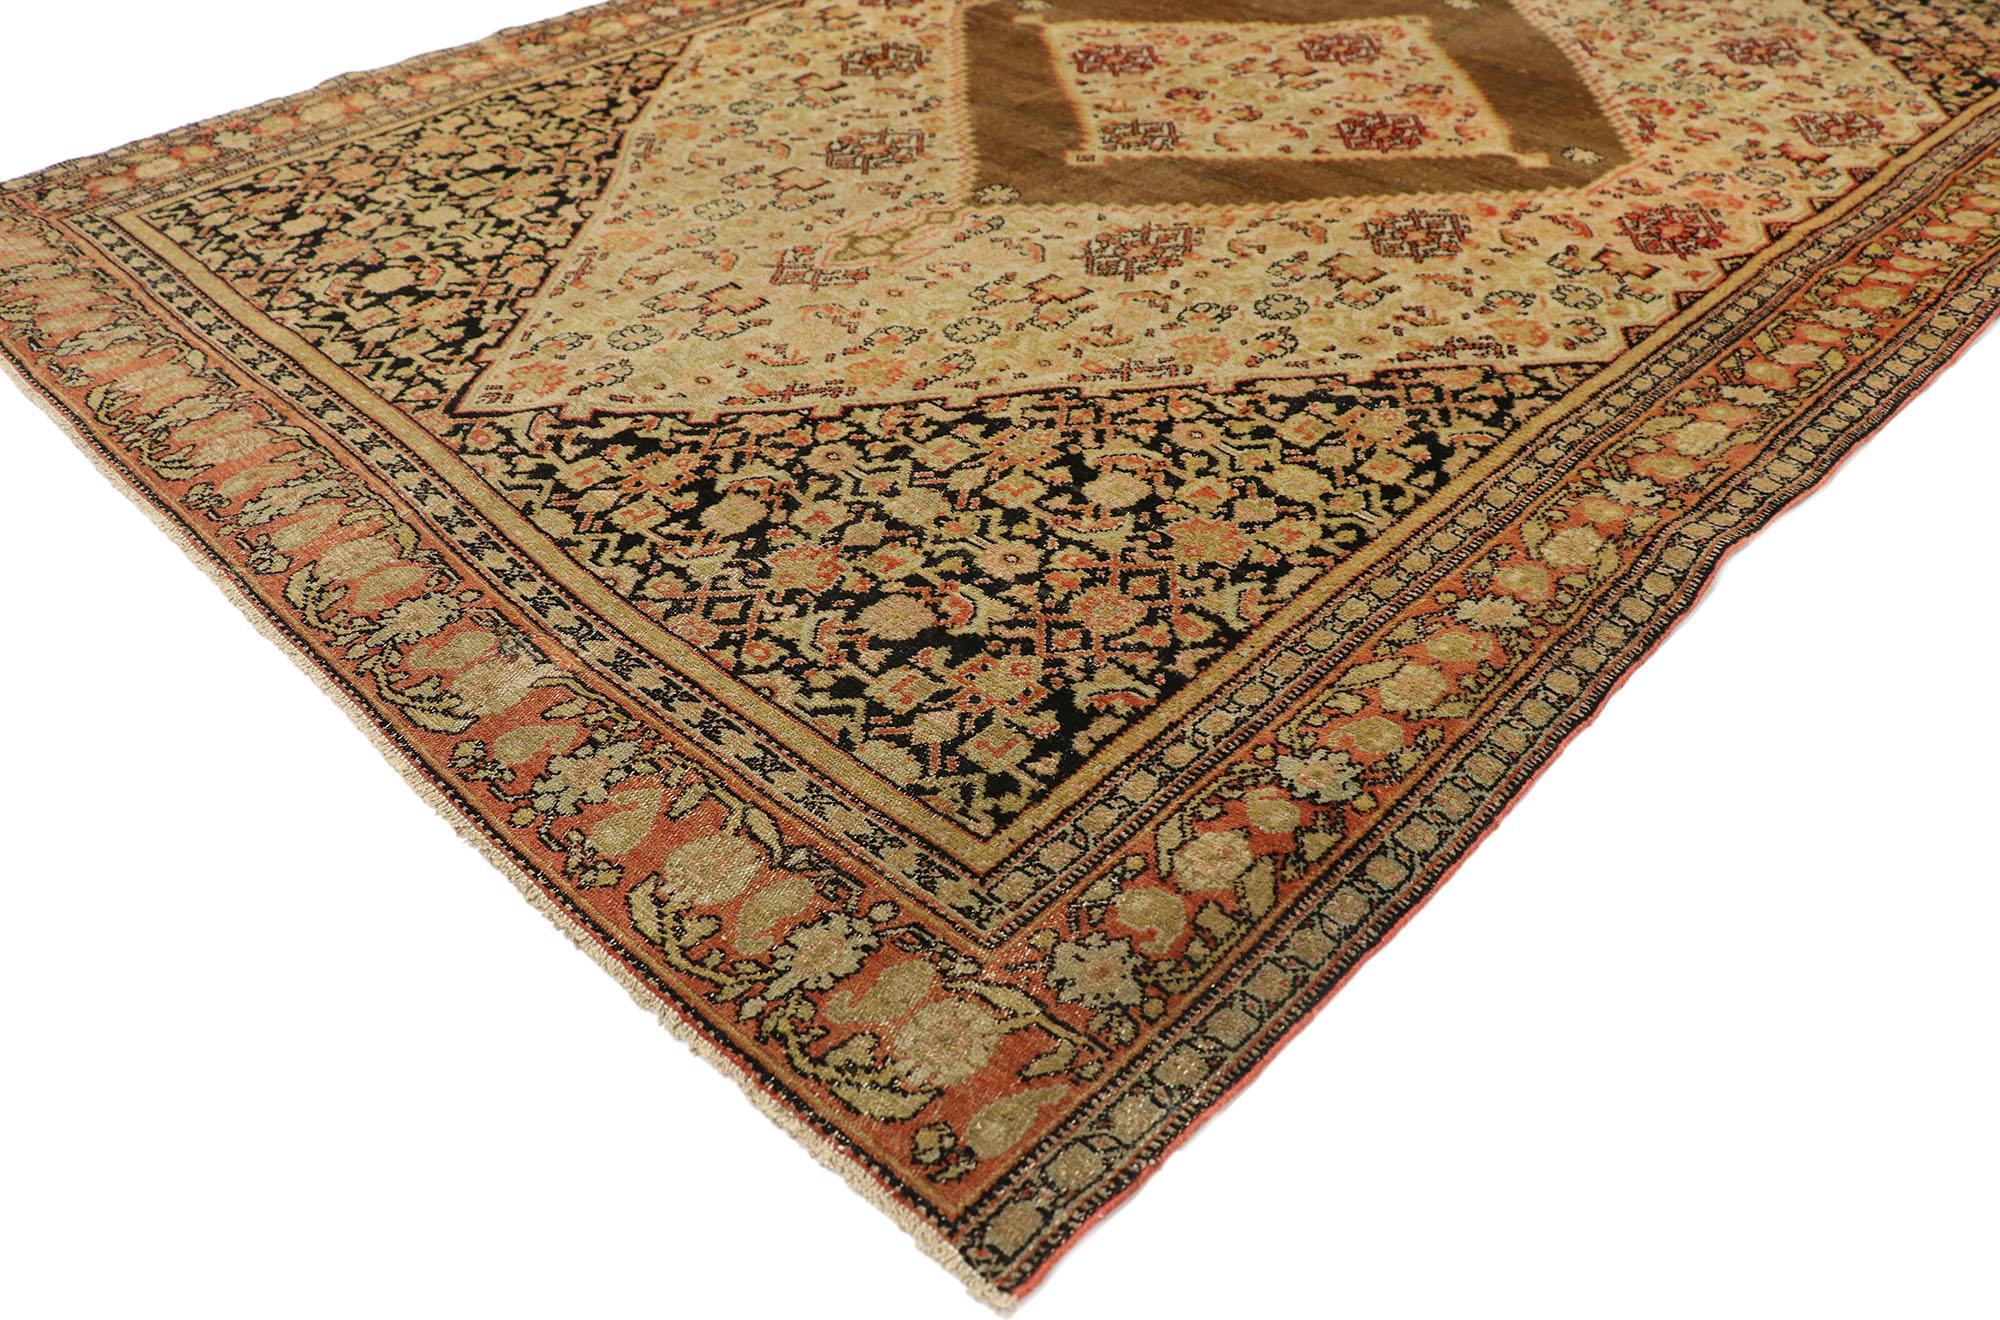 ??76956 Distressed antique Persian Senneh rug with Rustic Mid-Century Modern style. ?With its geometric pattern and warm earth-tone colors, this hand knotted wool distressed antique Persian Design gallery rug embodies a rustic Mid-Century Modern